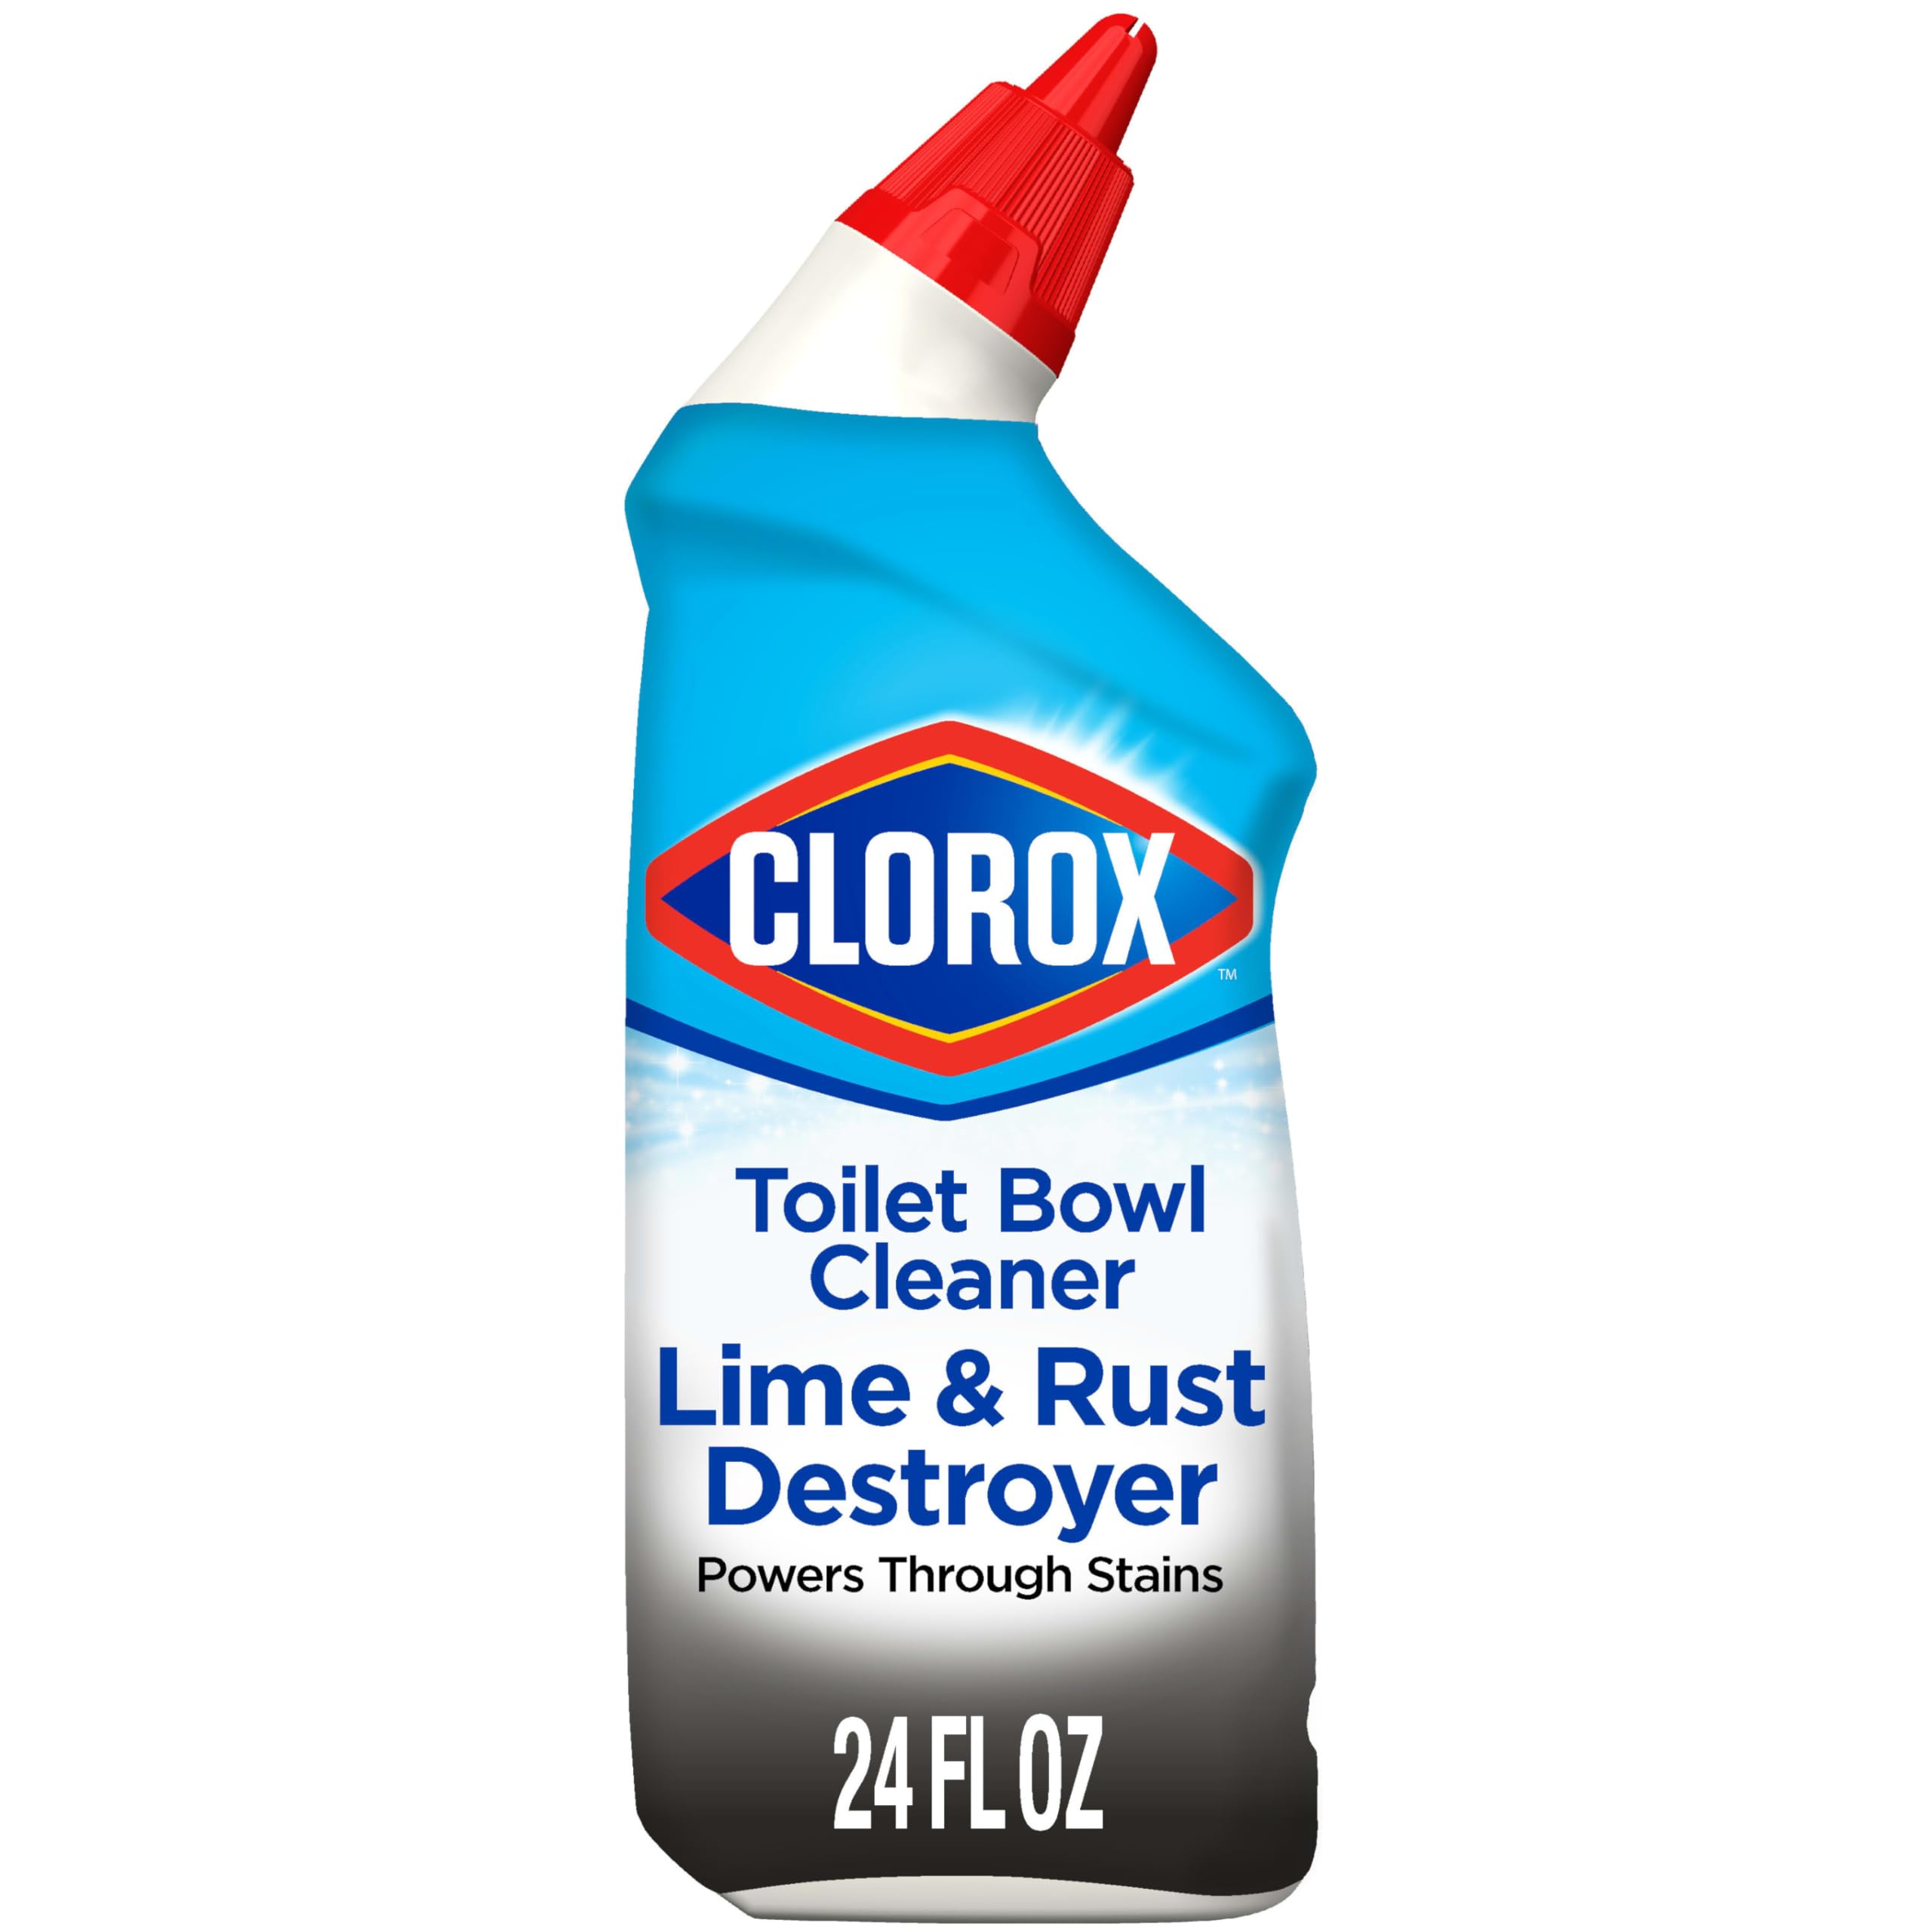 Clorox Toilet Bowl Cleaner Lime & Rust Destroyer 24 Ounces [Subscribe & Save] $2.65